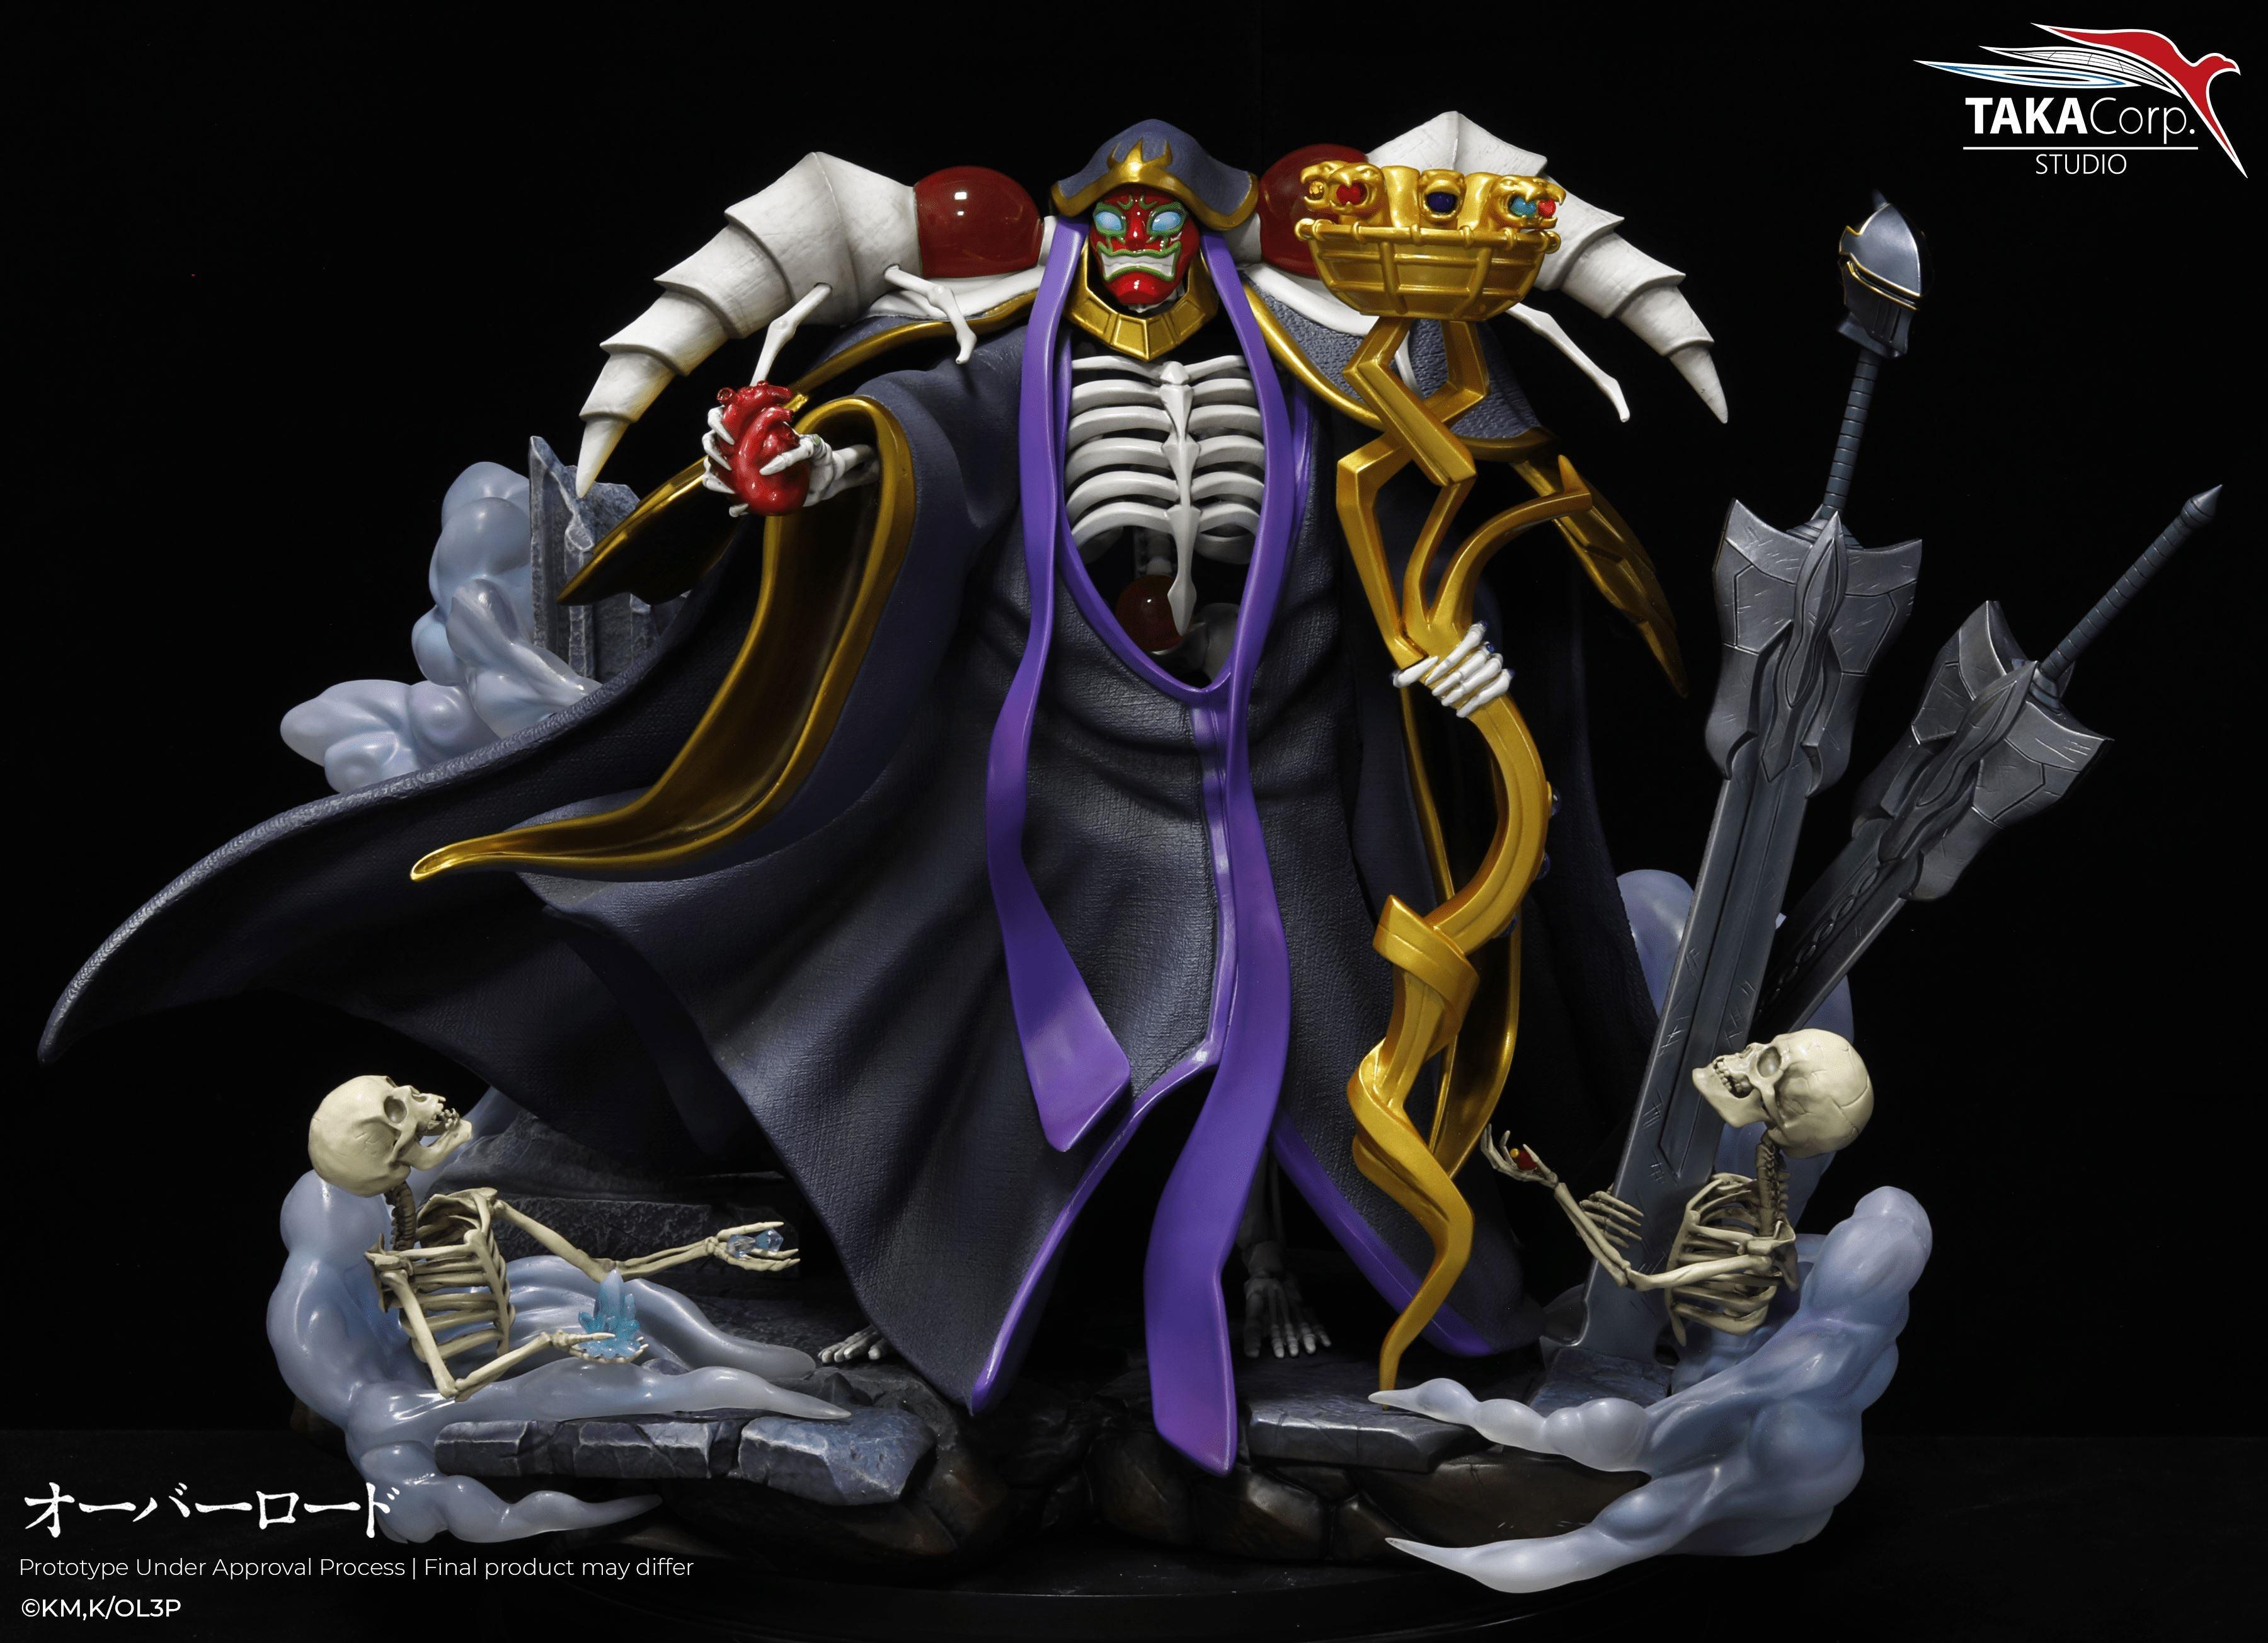 Overlord-Ainz Ooal Gown Statue -Flexible Plan 10 Months Resin Figures Takacorp Studio 